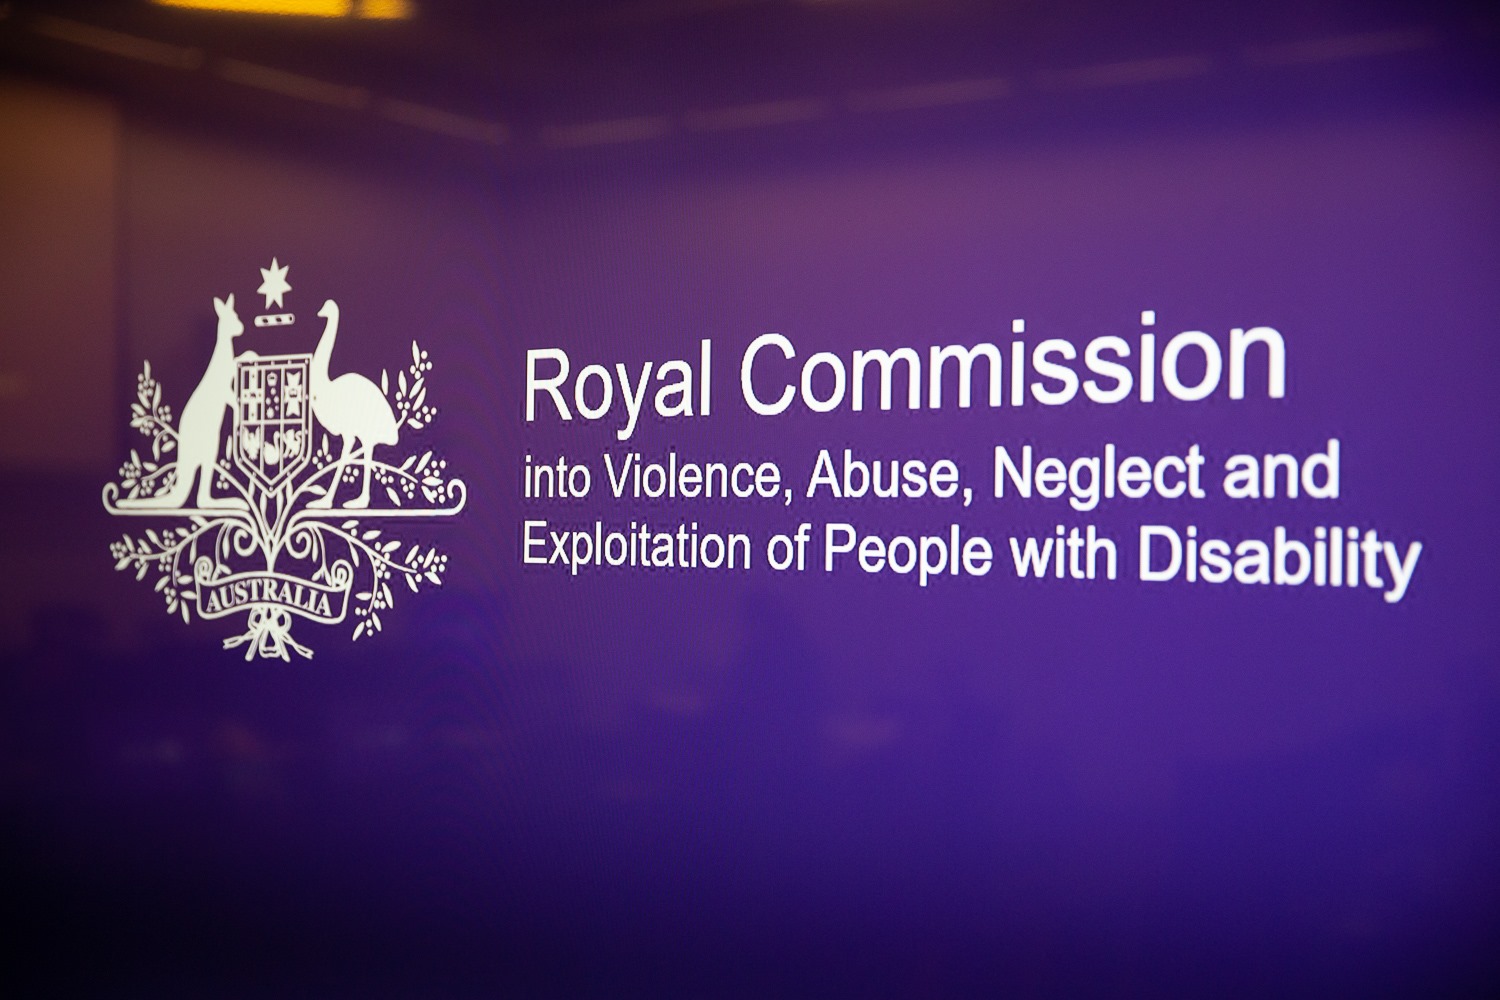 Royal Commission into Violence, Abuse, Neglect and Exploitation of People with Disability